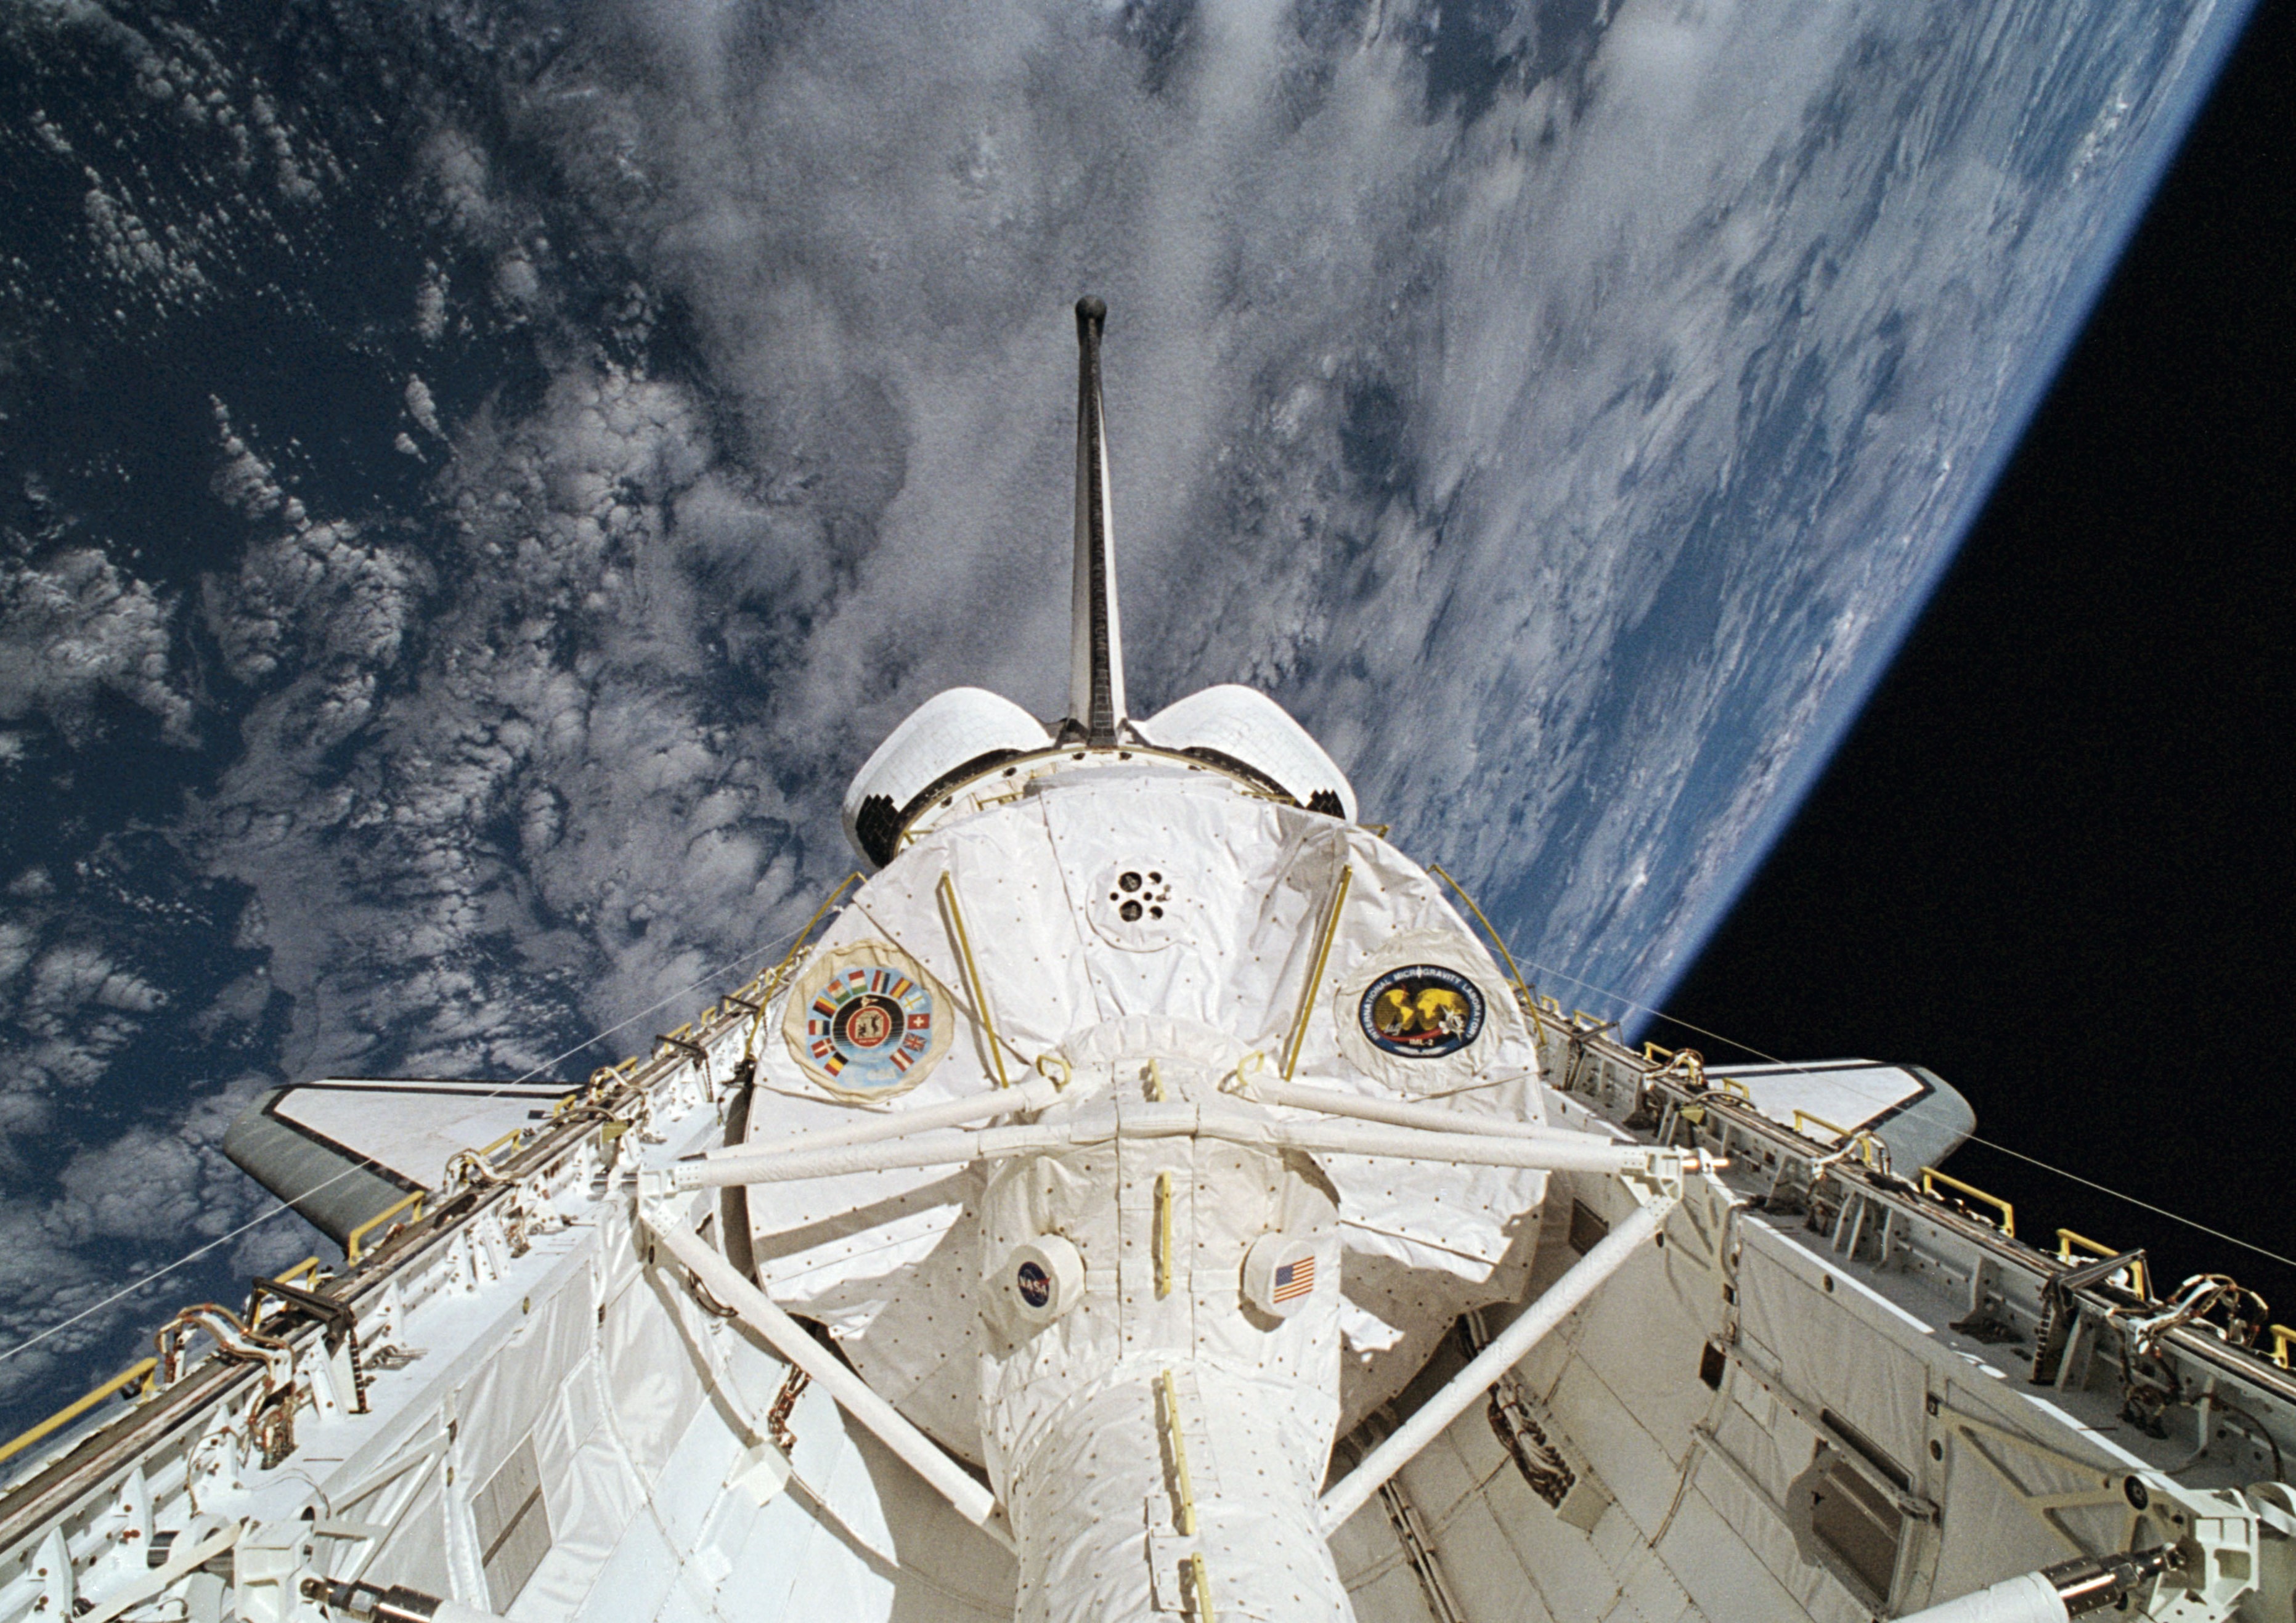 View of the Spacelab module in the shuttle's payload bay